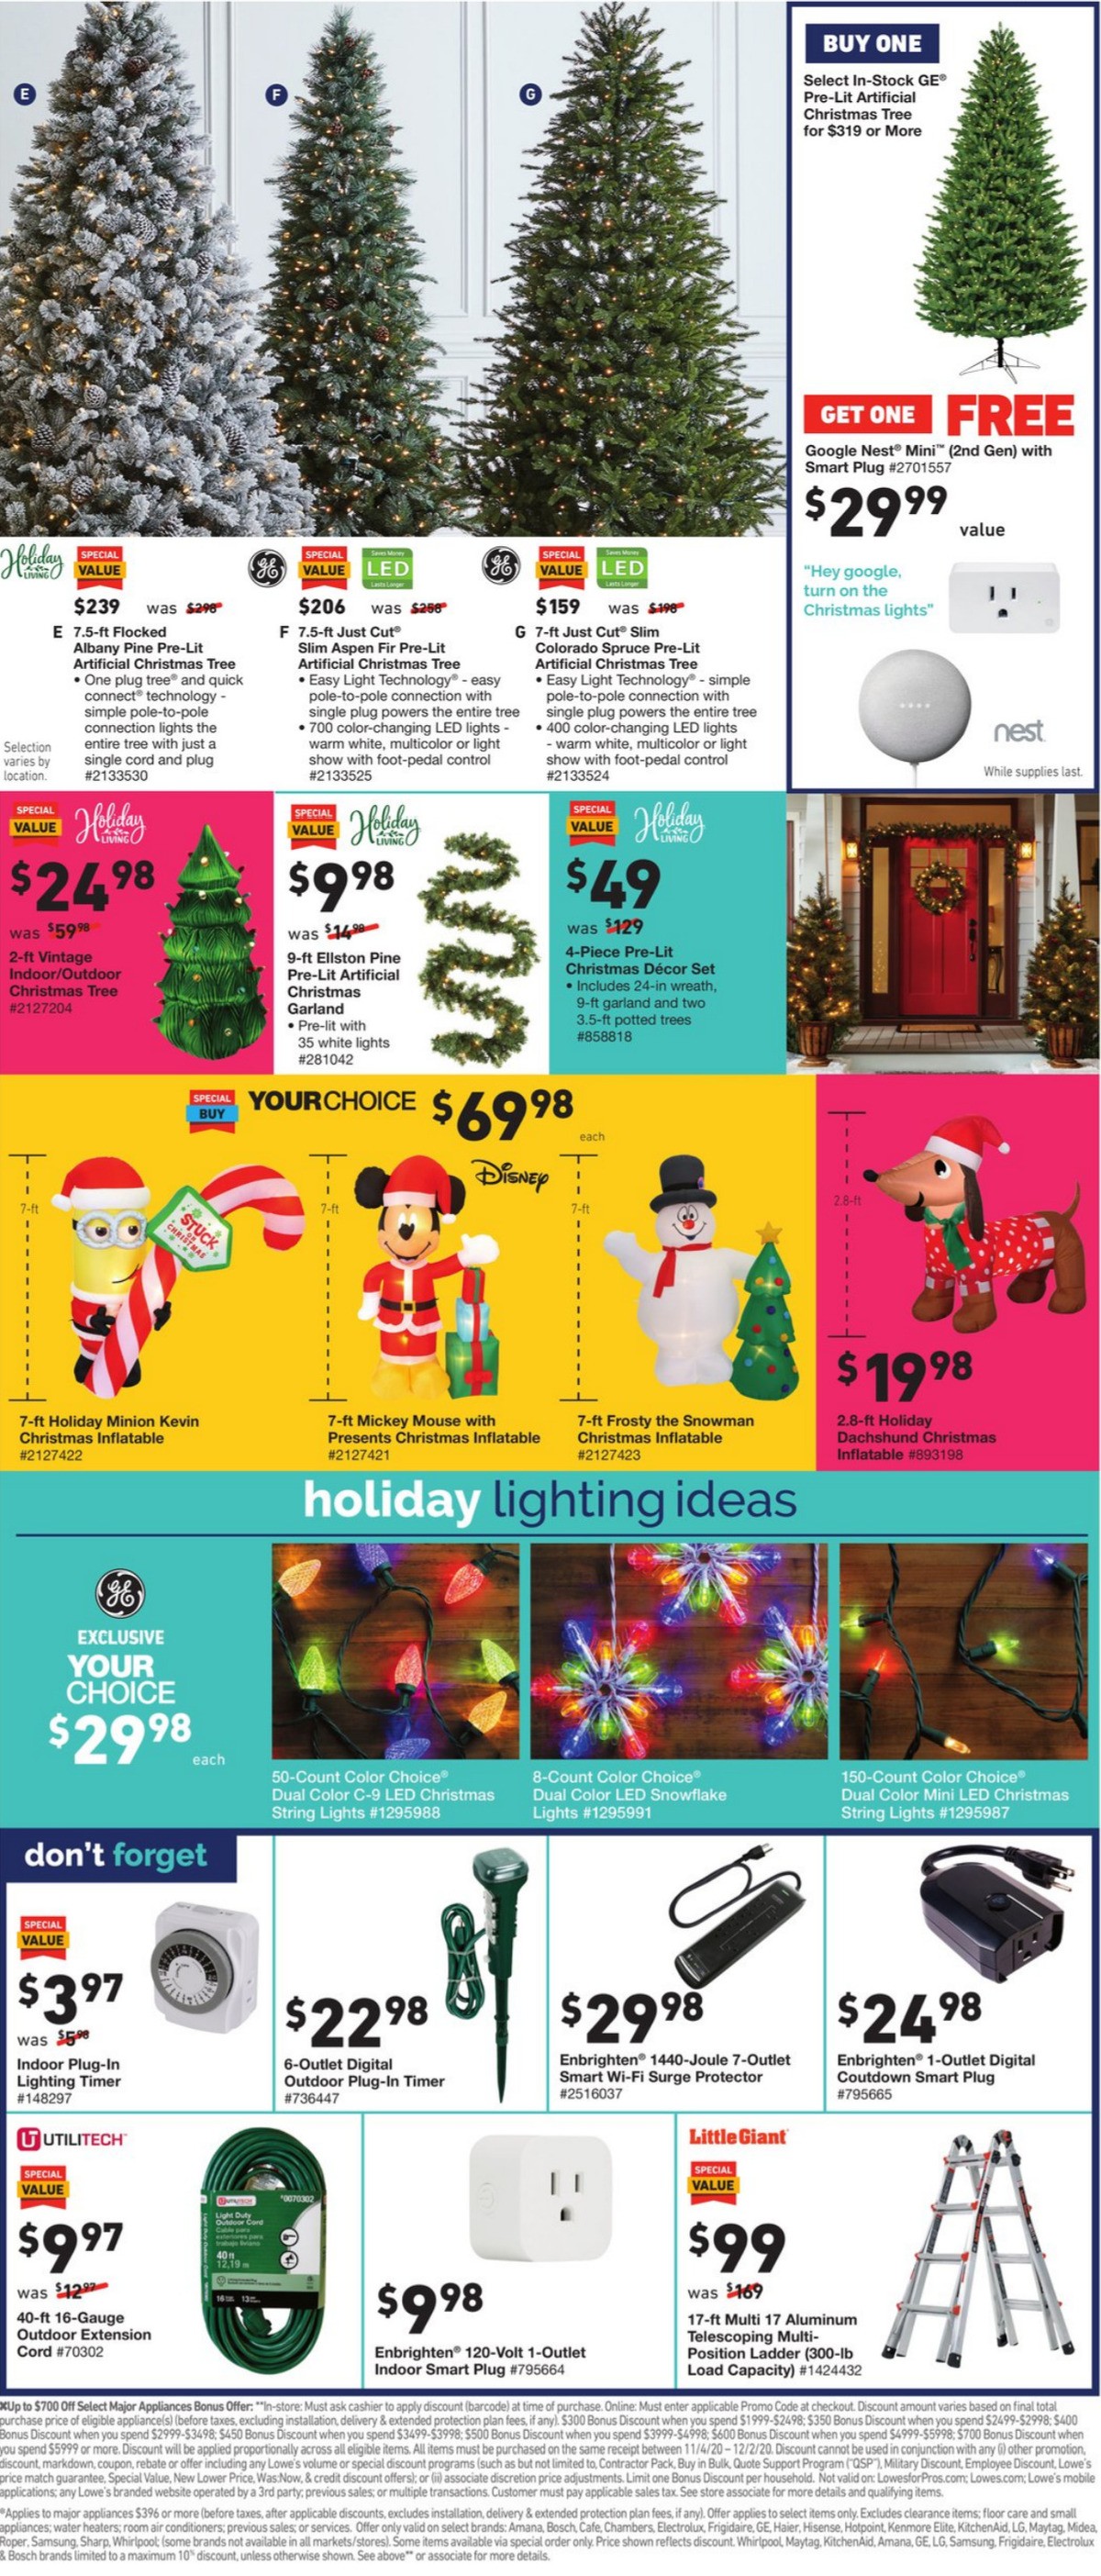 Lowe's Seasons of Savings Extended Event Weekly Ad from November 26